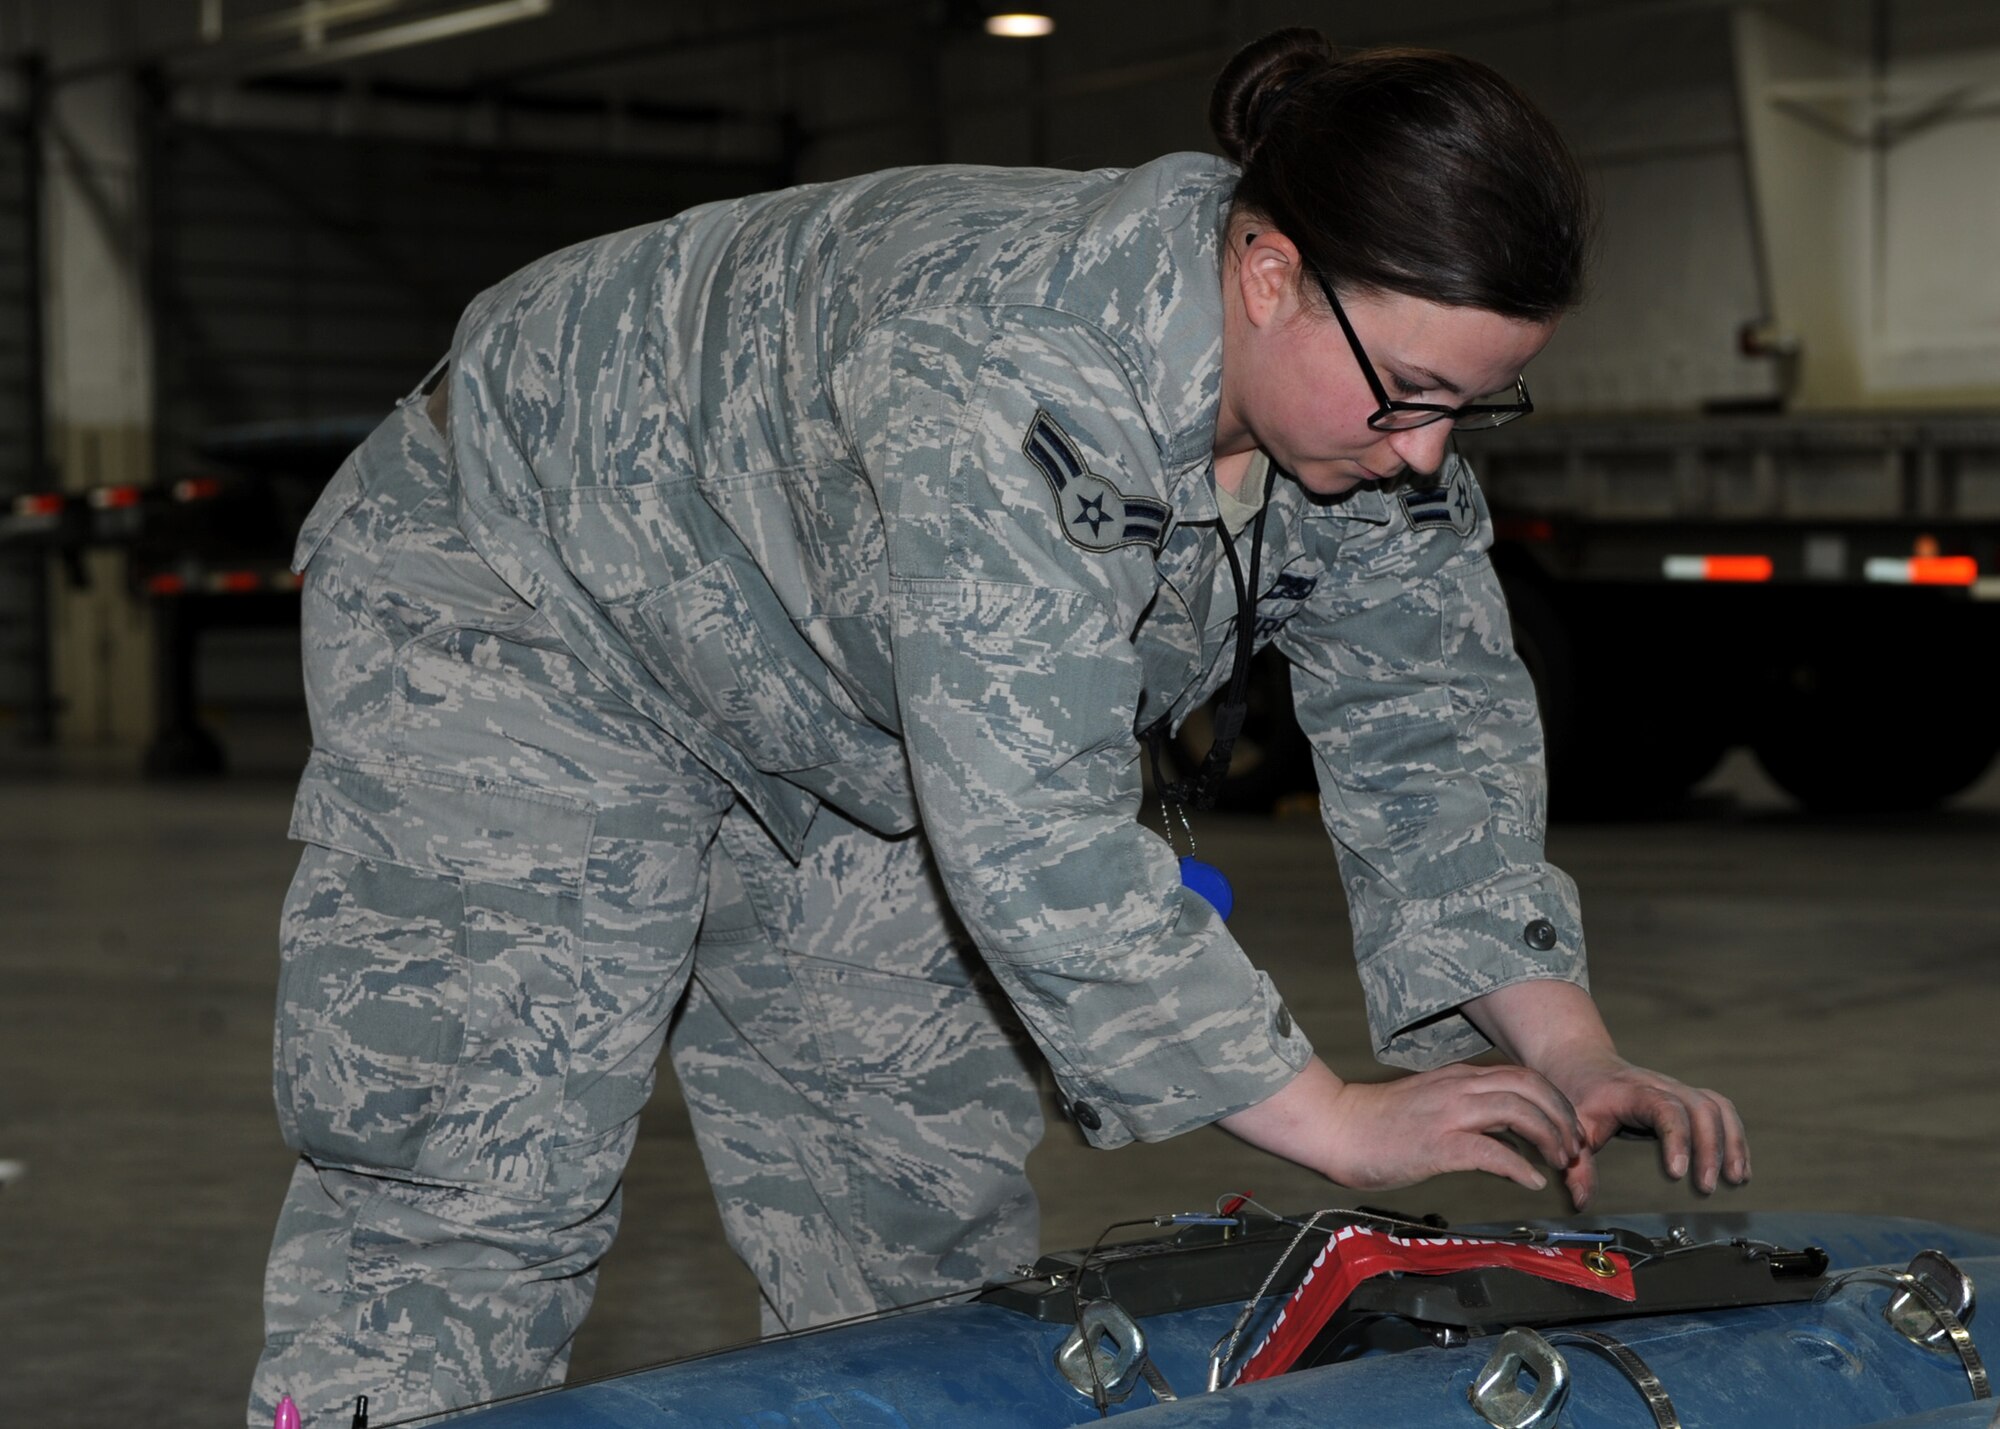 Airman 1st Class Lauren Sessums, 28th Munitions Squadron crew member, installs a delayed timer unit to a bomb dummy unit-50 during a training session at Ellsworth Air Force Base, S.D., Jan. 19, 2016. The DTU allows a pillow parachute to be deployed from the munition, enabling the bomb to detonate at lower altitudes for a close ground attack. (U.S. Air Force photo by Airman 1st Class Denise M. Nevins/Released)